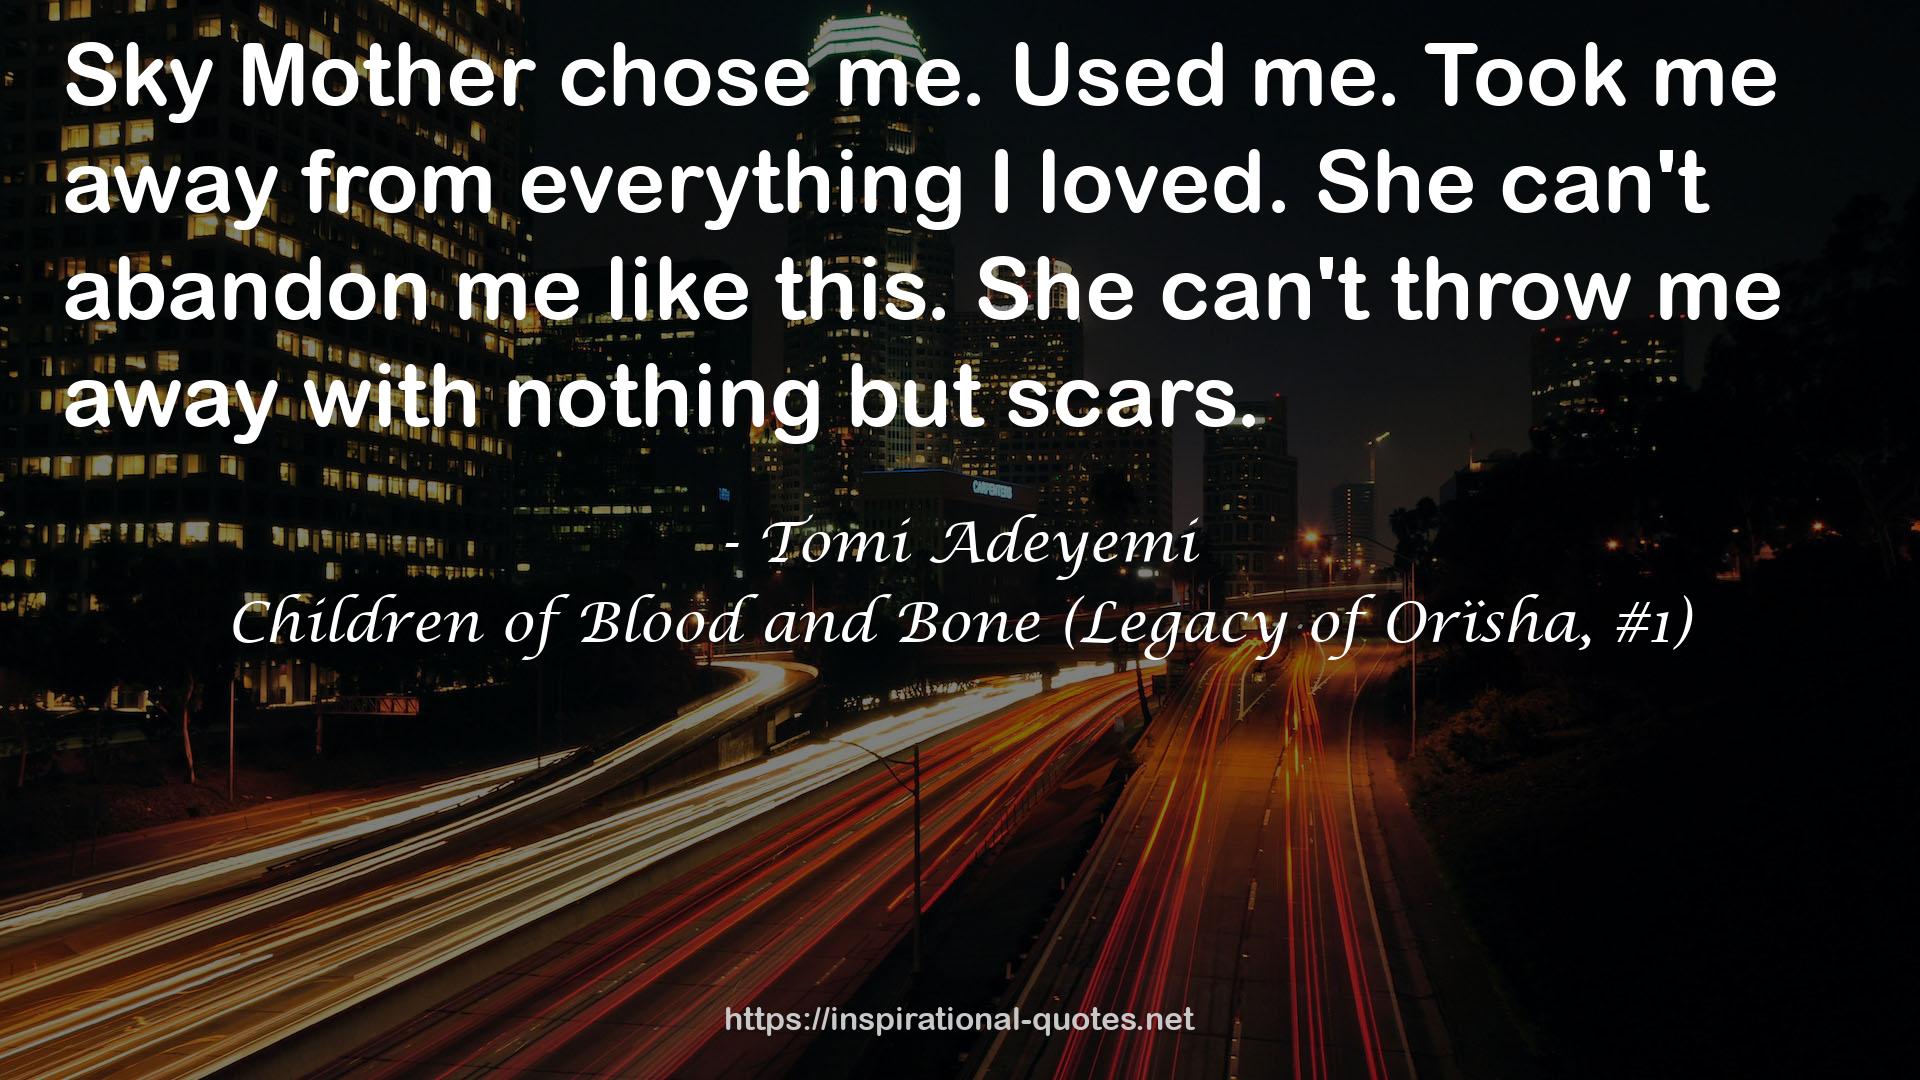 Children of Blood and Bone (Legacy of Orïsha, #1) QUOTES